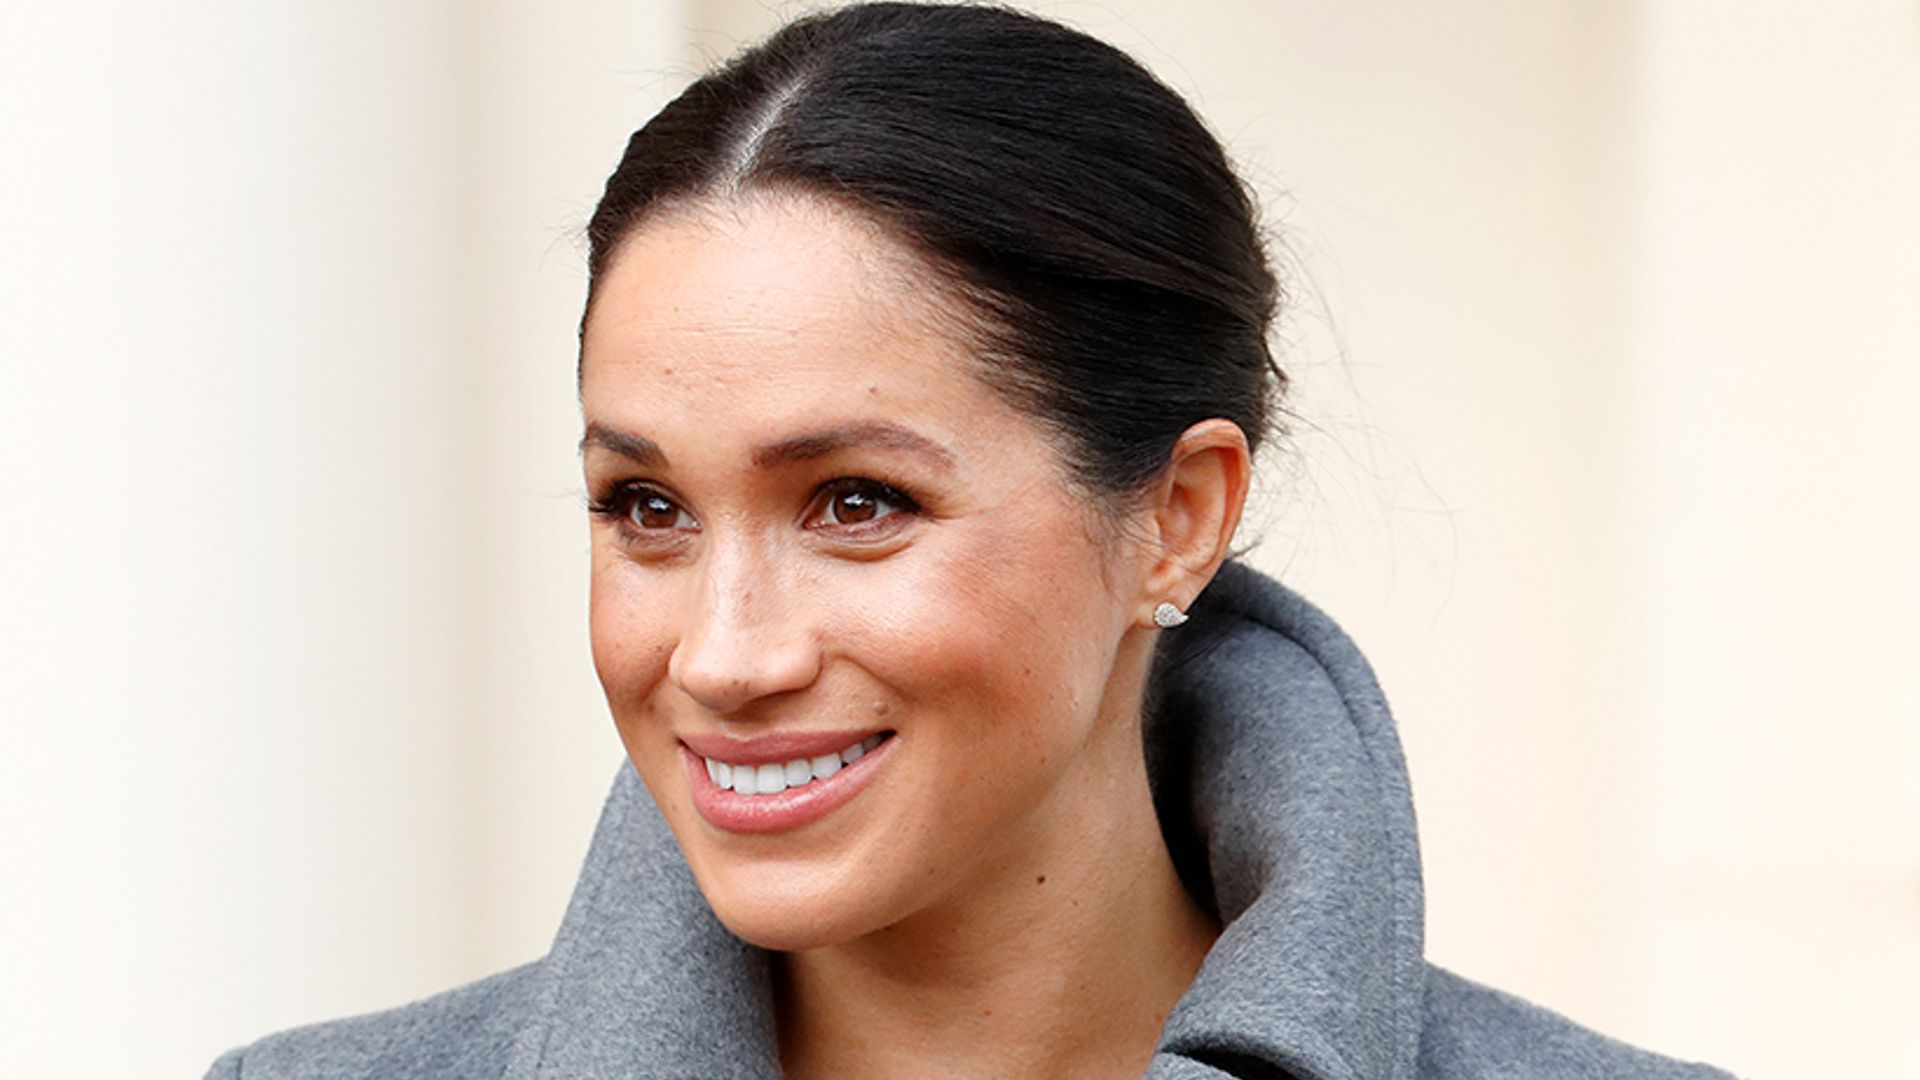 Meghan Markle has spoken about her due date – all the details